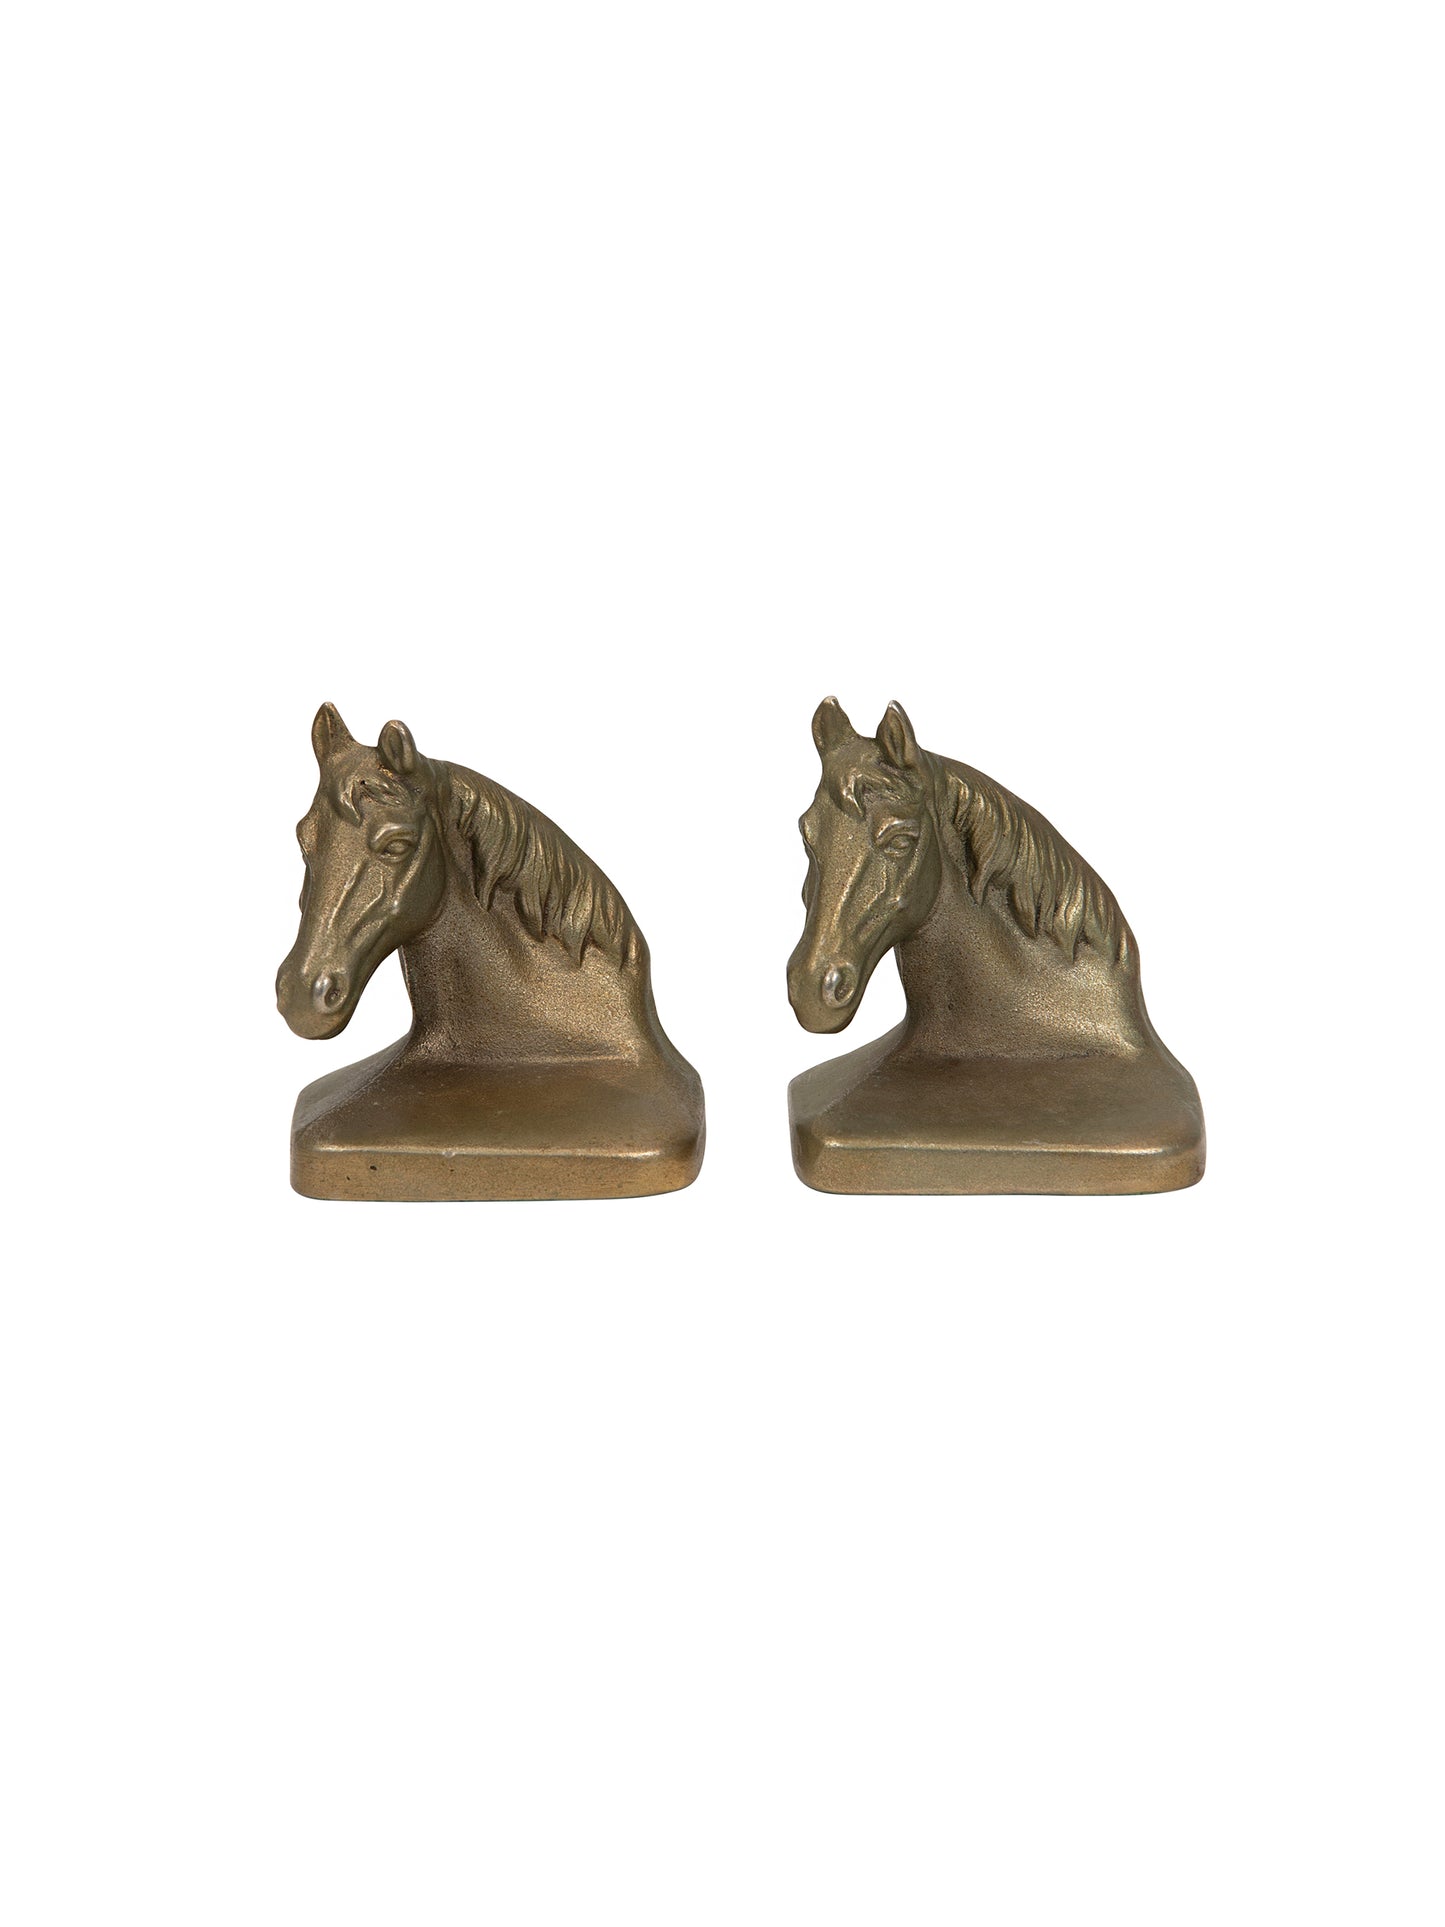 Vintage Mid Century Cast Iron Thoroughbred Bookends Weston Table